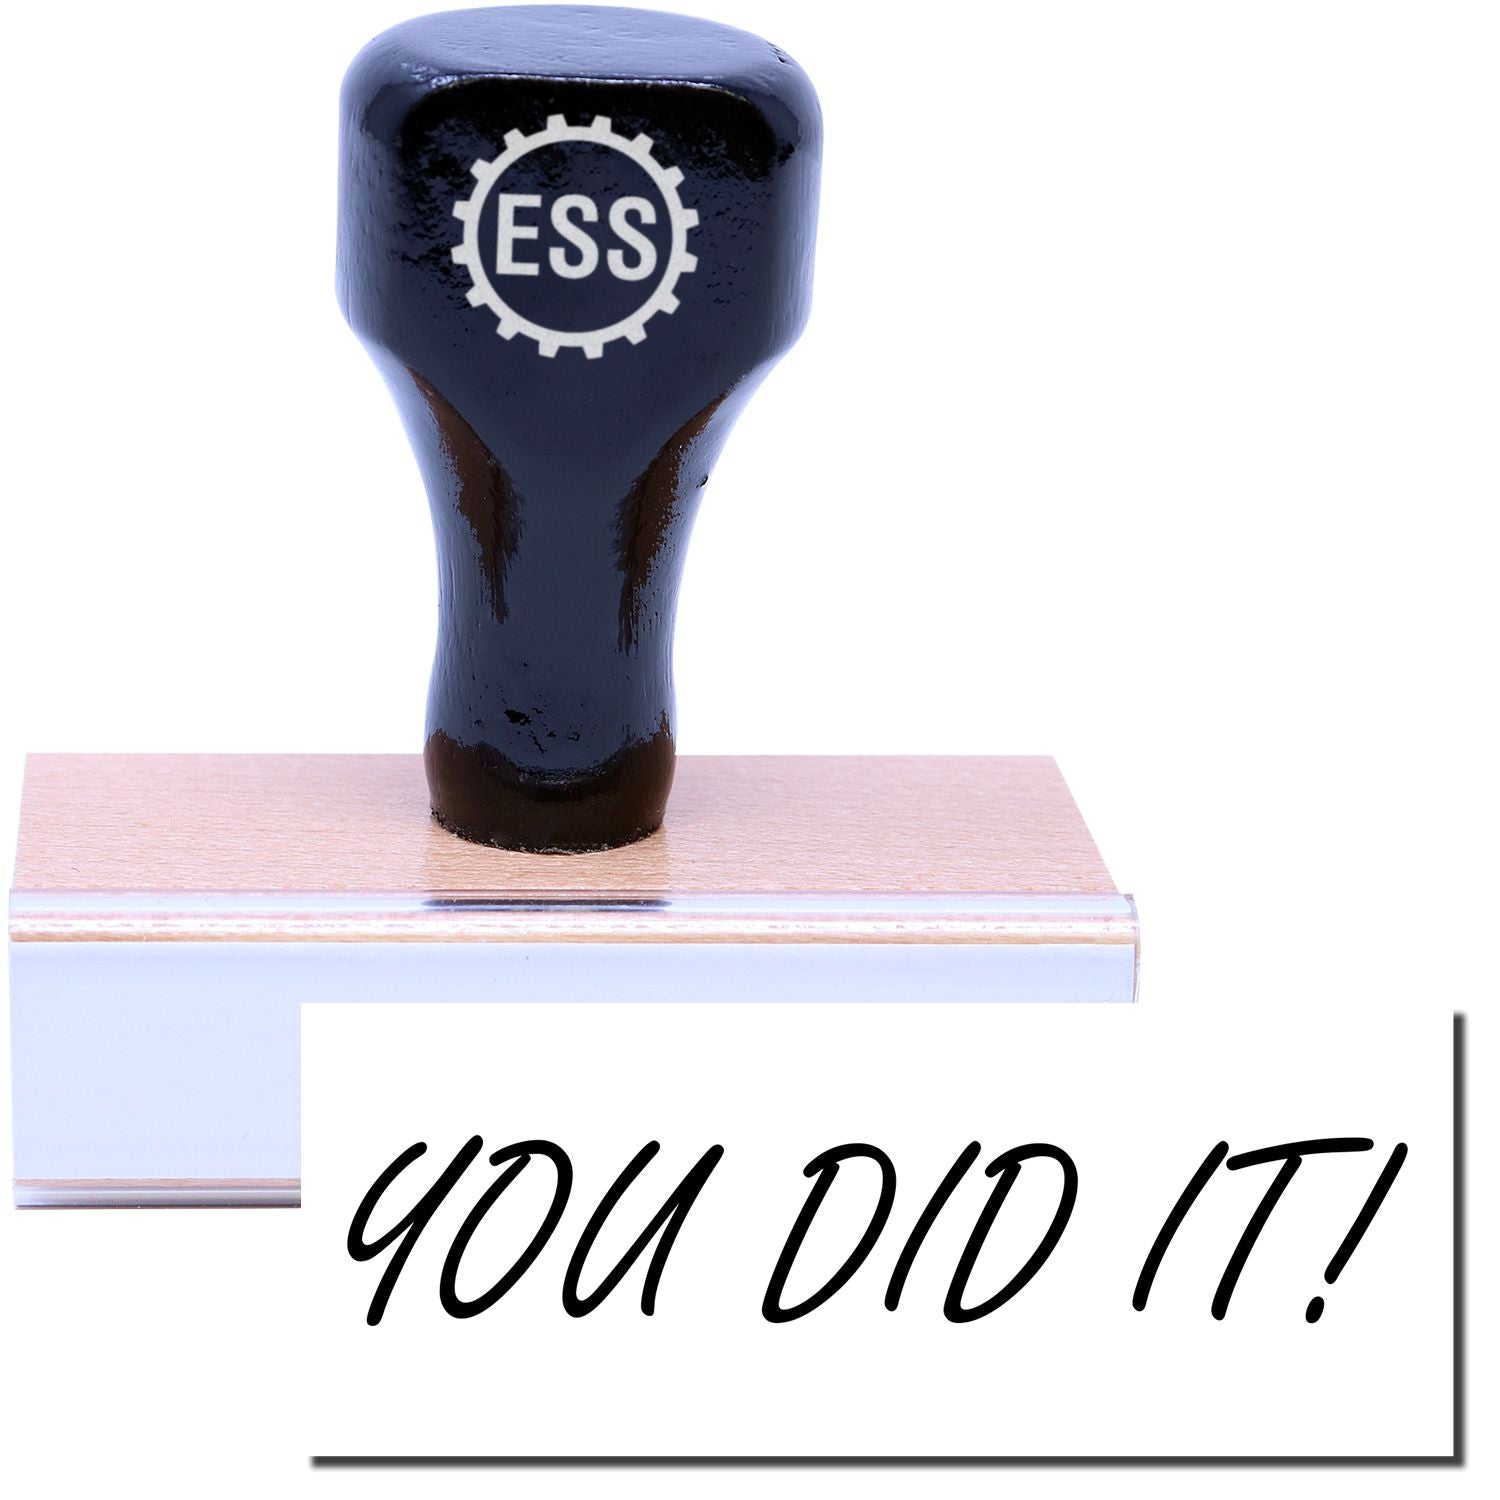 A stock office rubber stamp with a stamped image showing how the text "YOU DID IT!" is displayed after stamping.